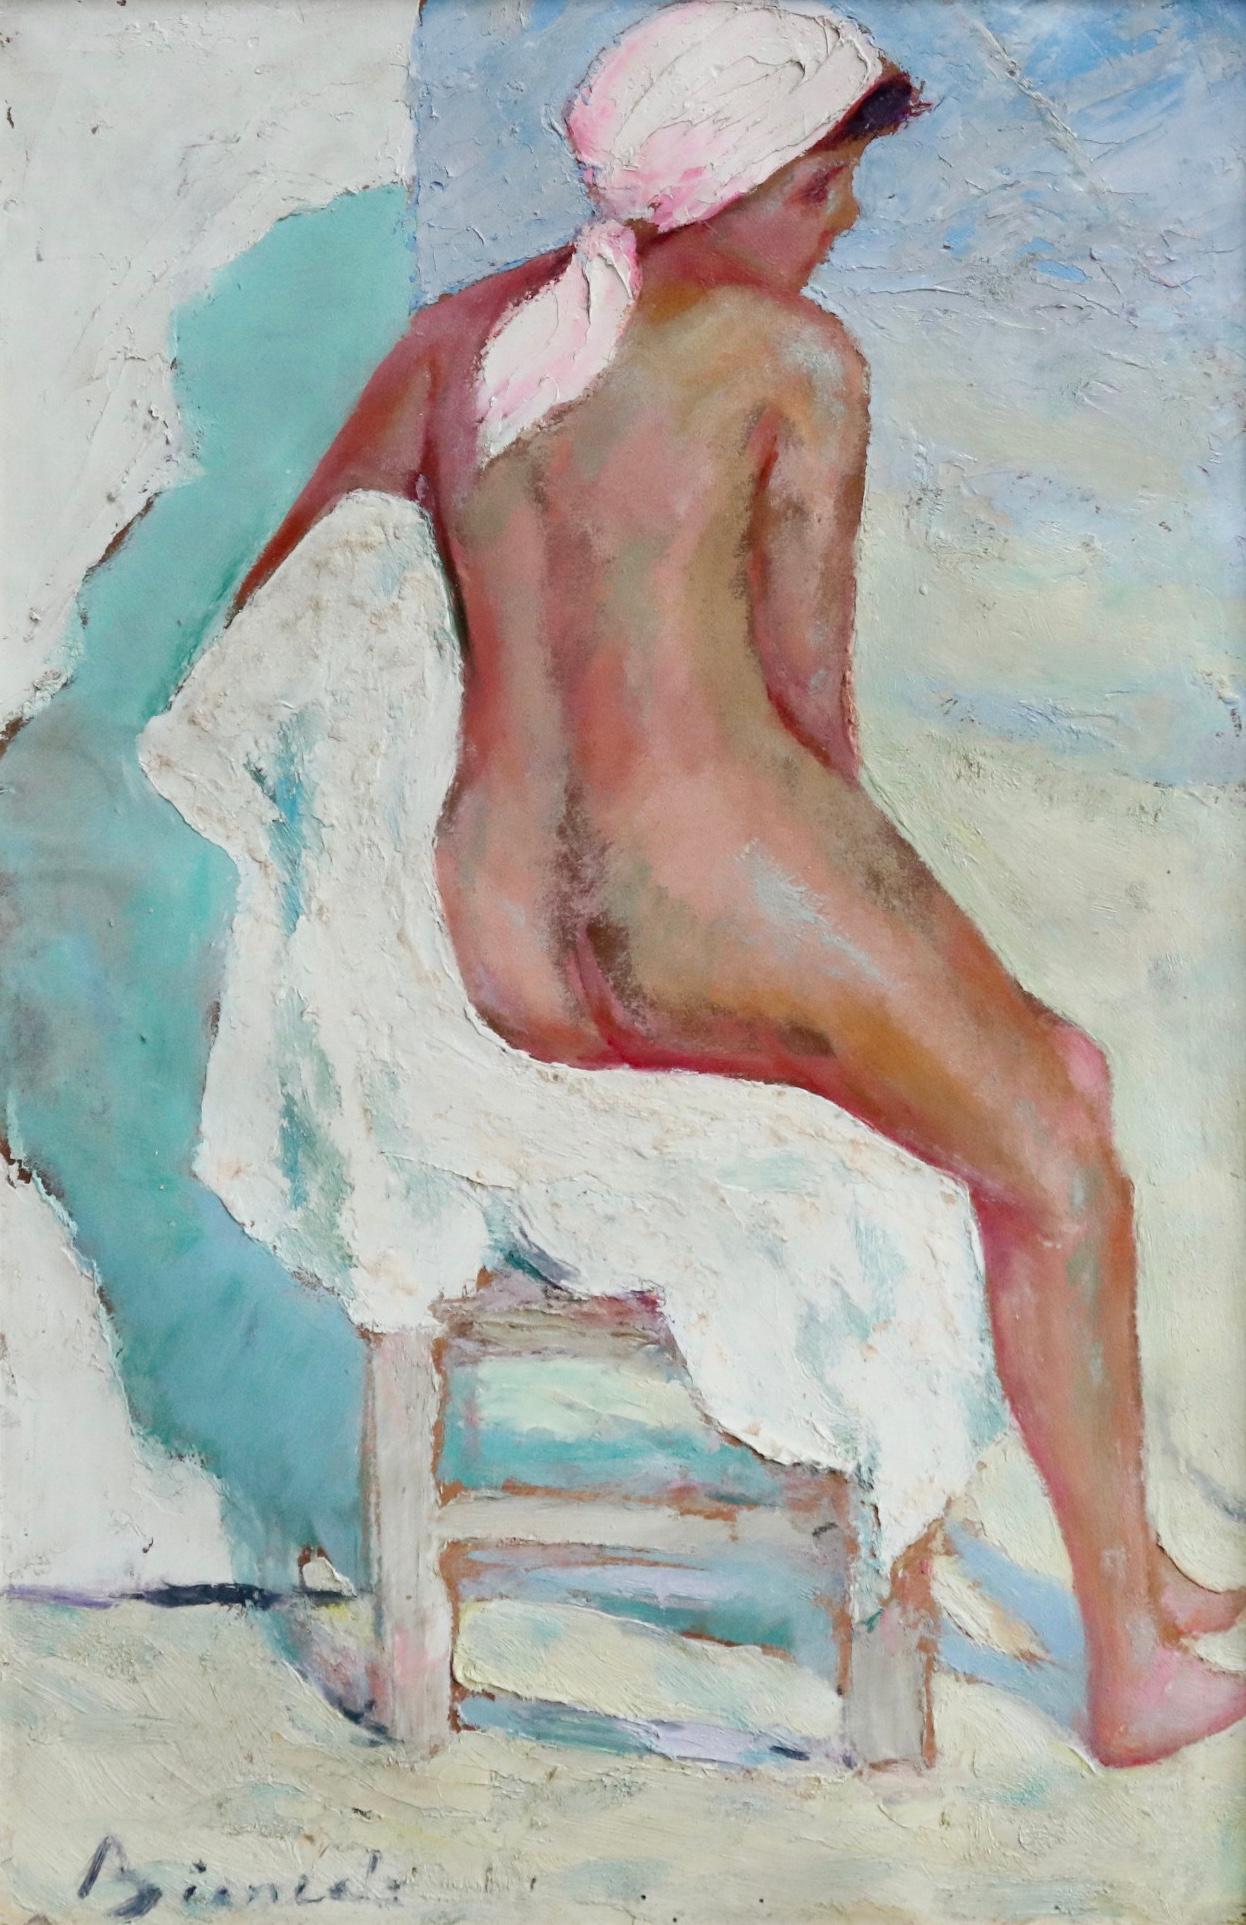 Oil on paper circa 1930 by Italian painter Bernardo Biancale depicting a nude woman seated on a chair beside a beach hut. Signed lower left. Framed dimensions are 25 inches high by 18 inches wide.

Bernardo Biancale was born in Sora in Italy on